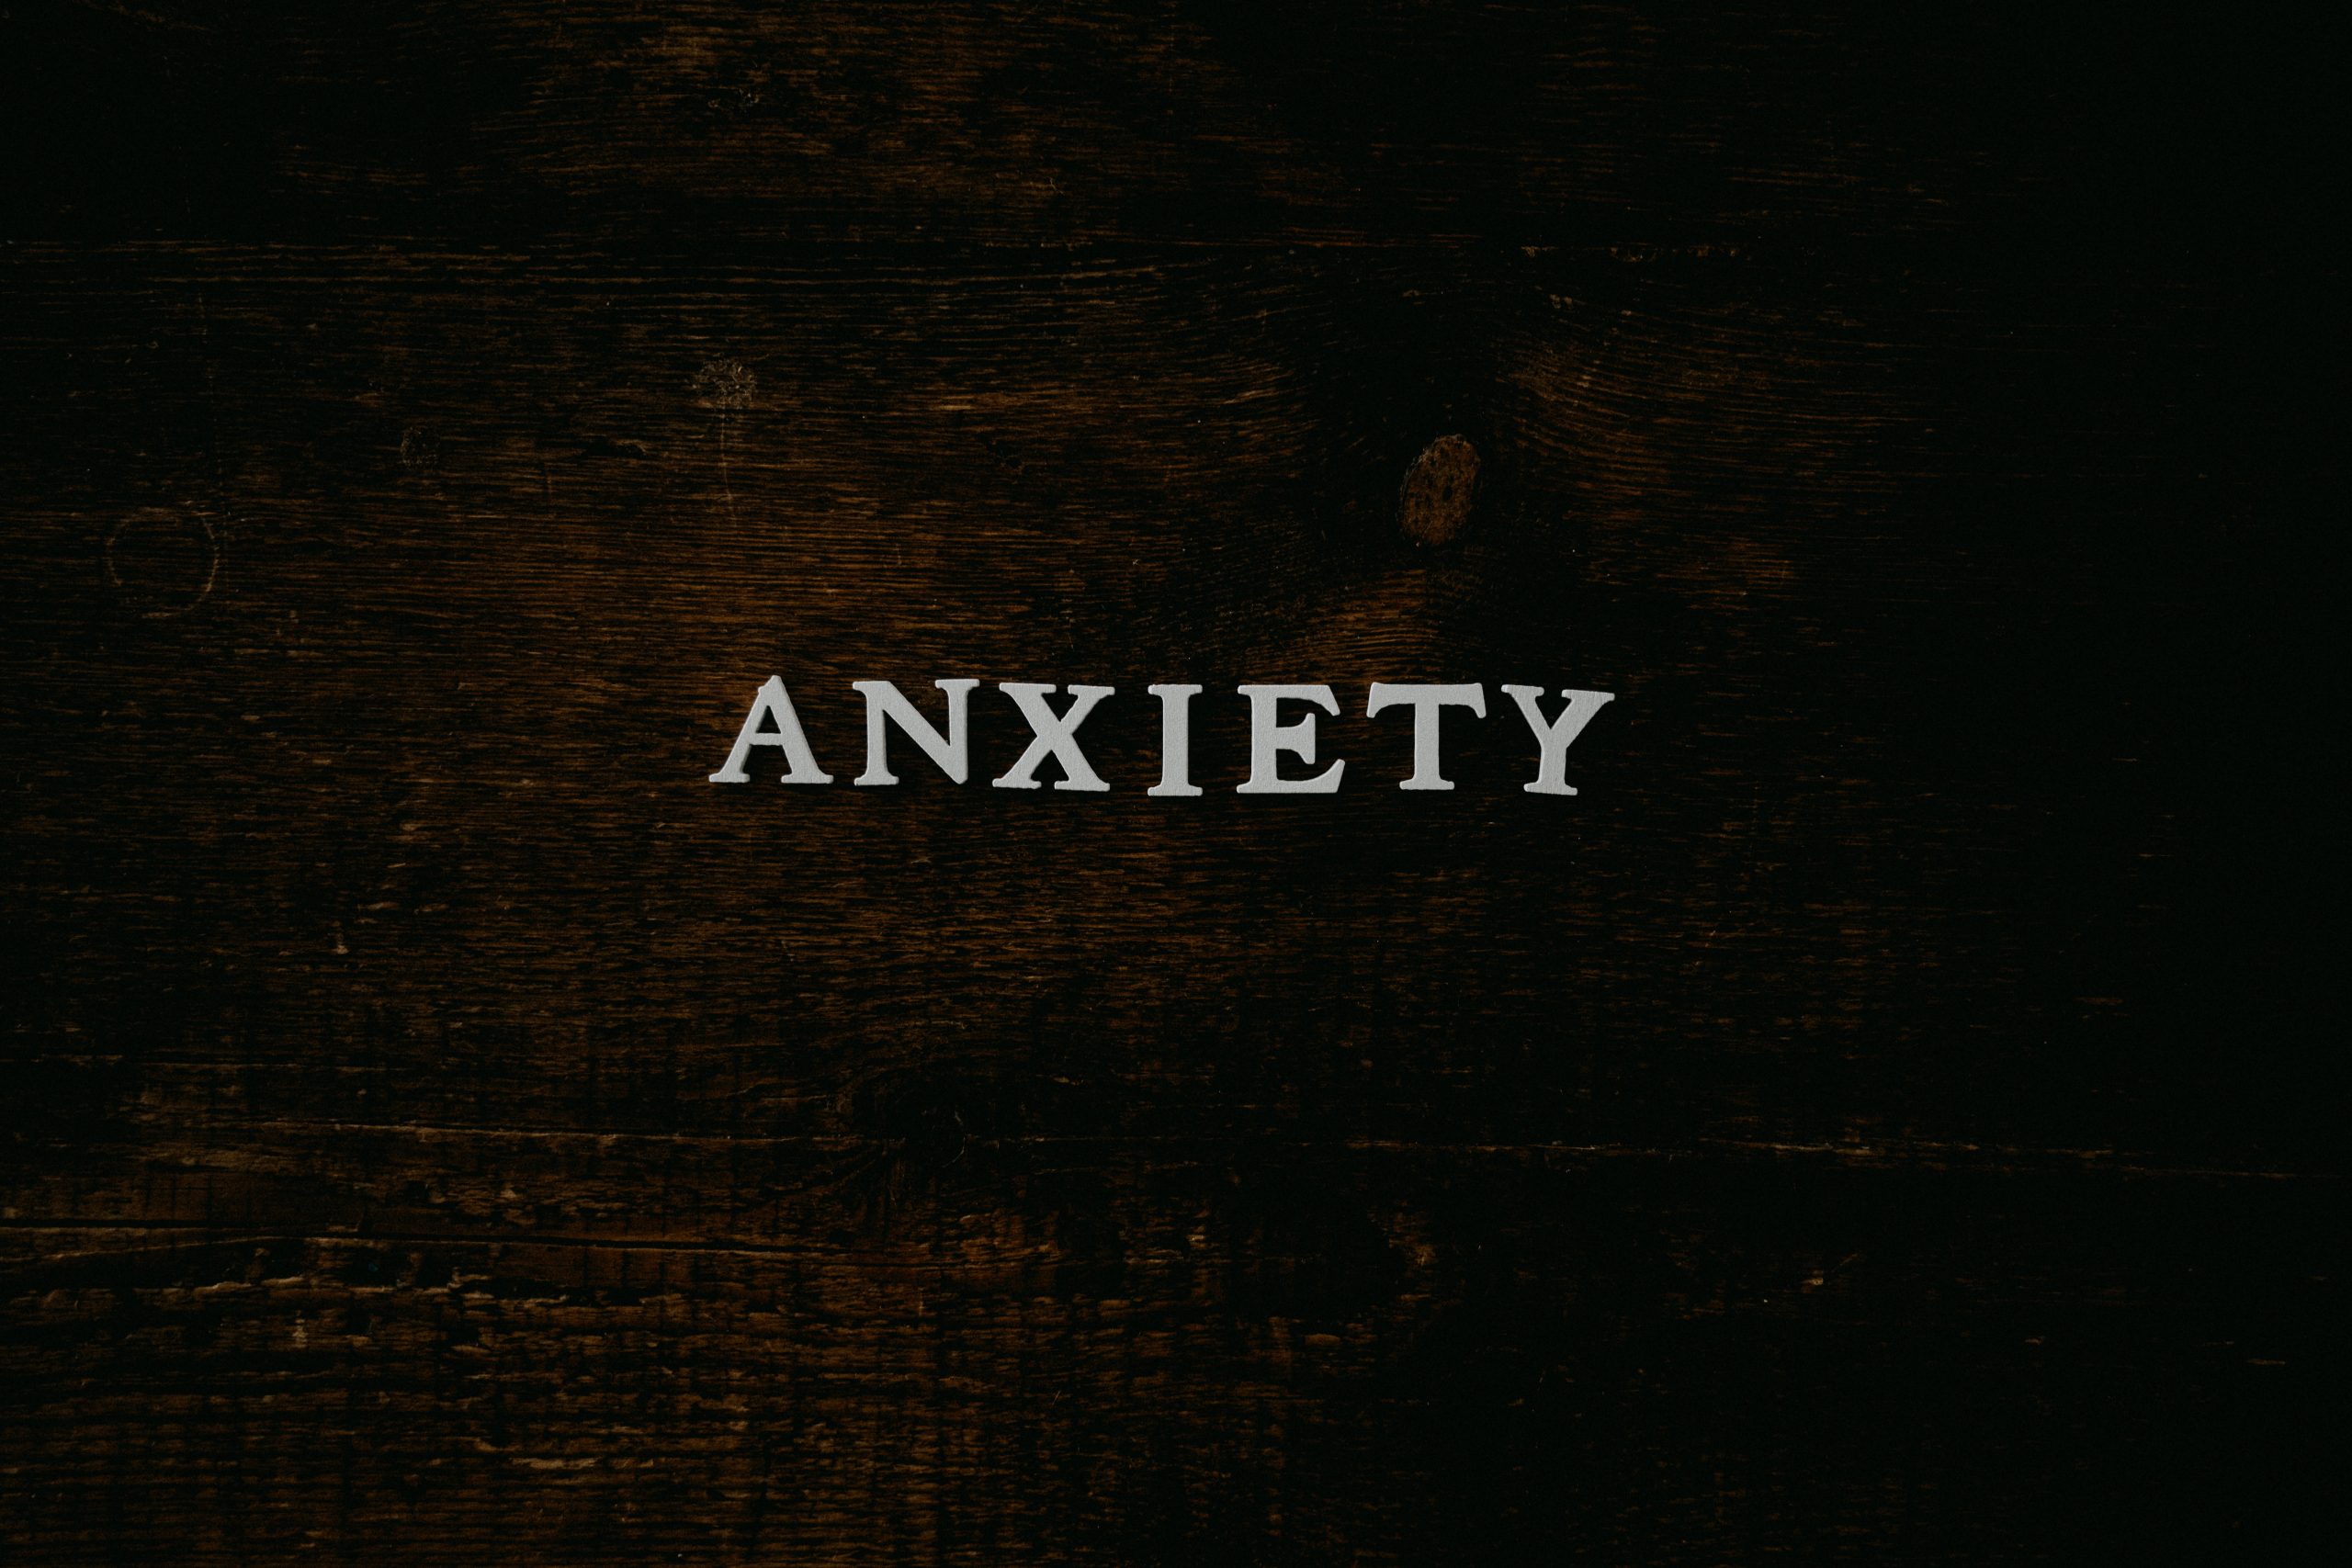 the word anxiety